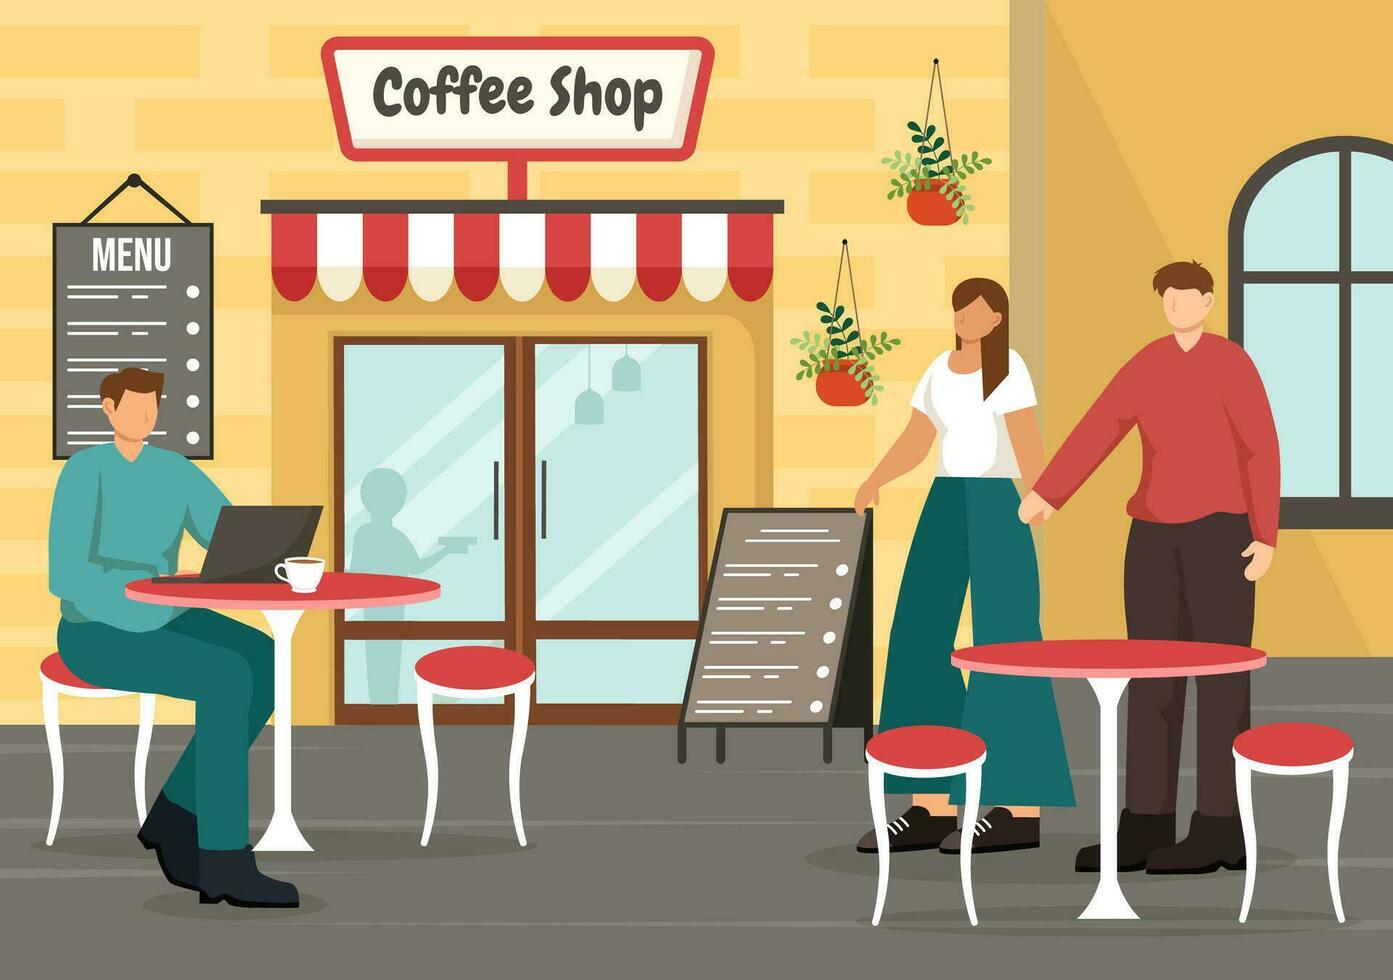 Coffee Shop Vector Illustration with Interior and Furniture Suitable for Poster or Advertisement in Flat Cartoon Background Design